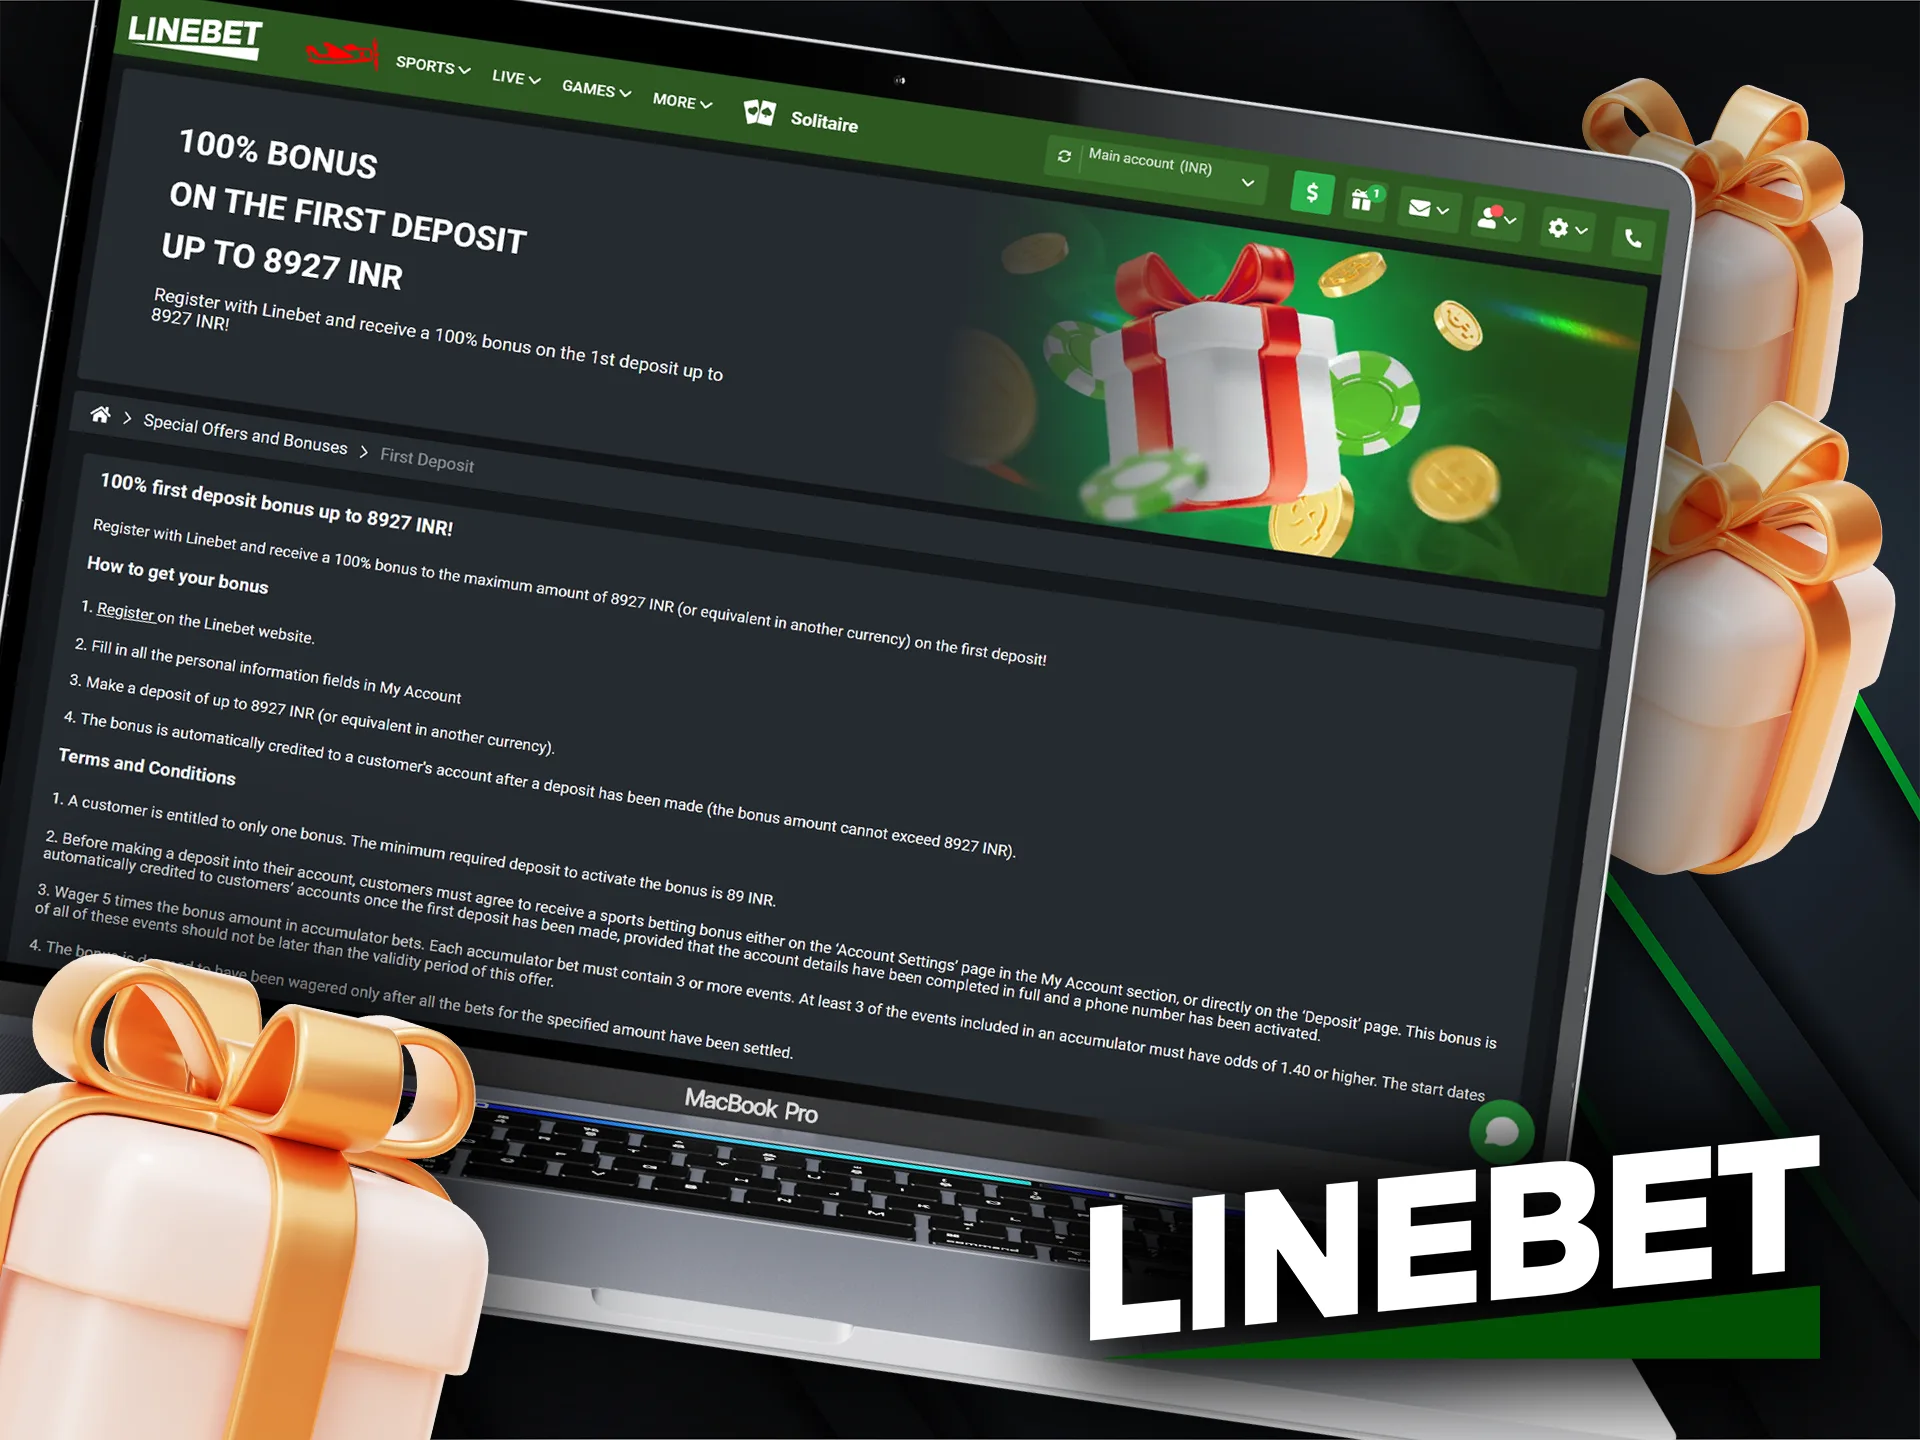 Don't miss the opportunity to get Linebet first deposit bonus.